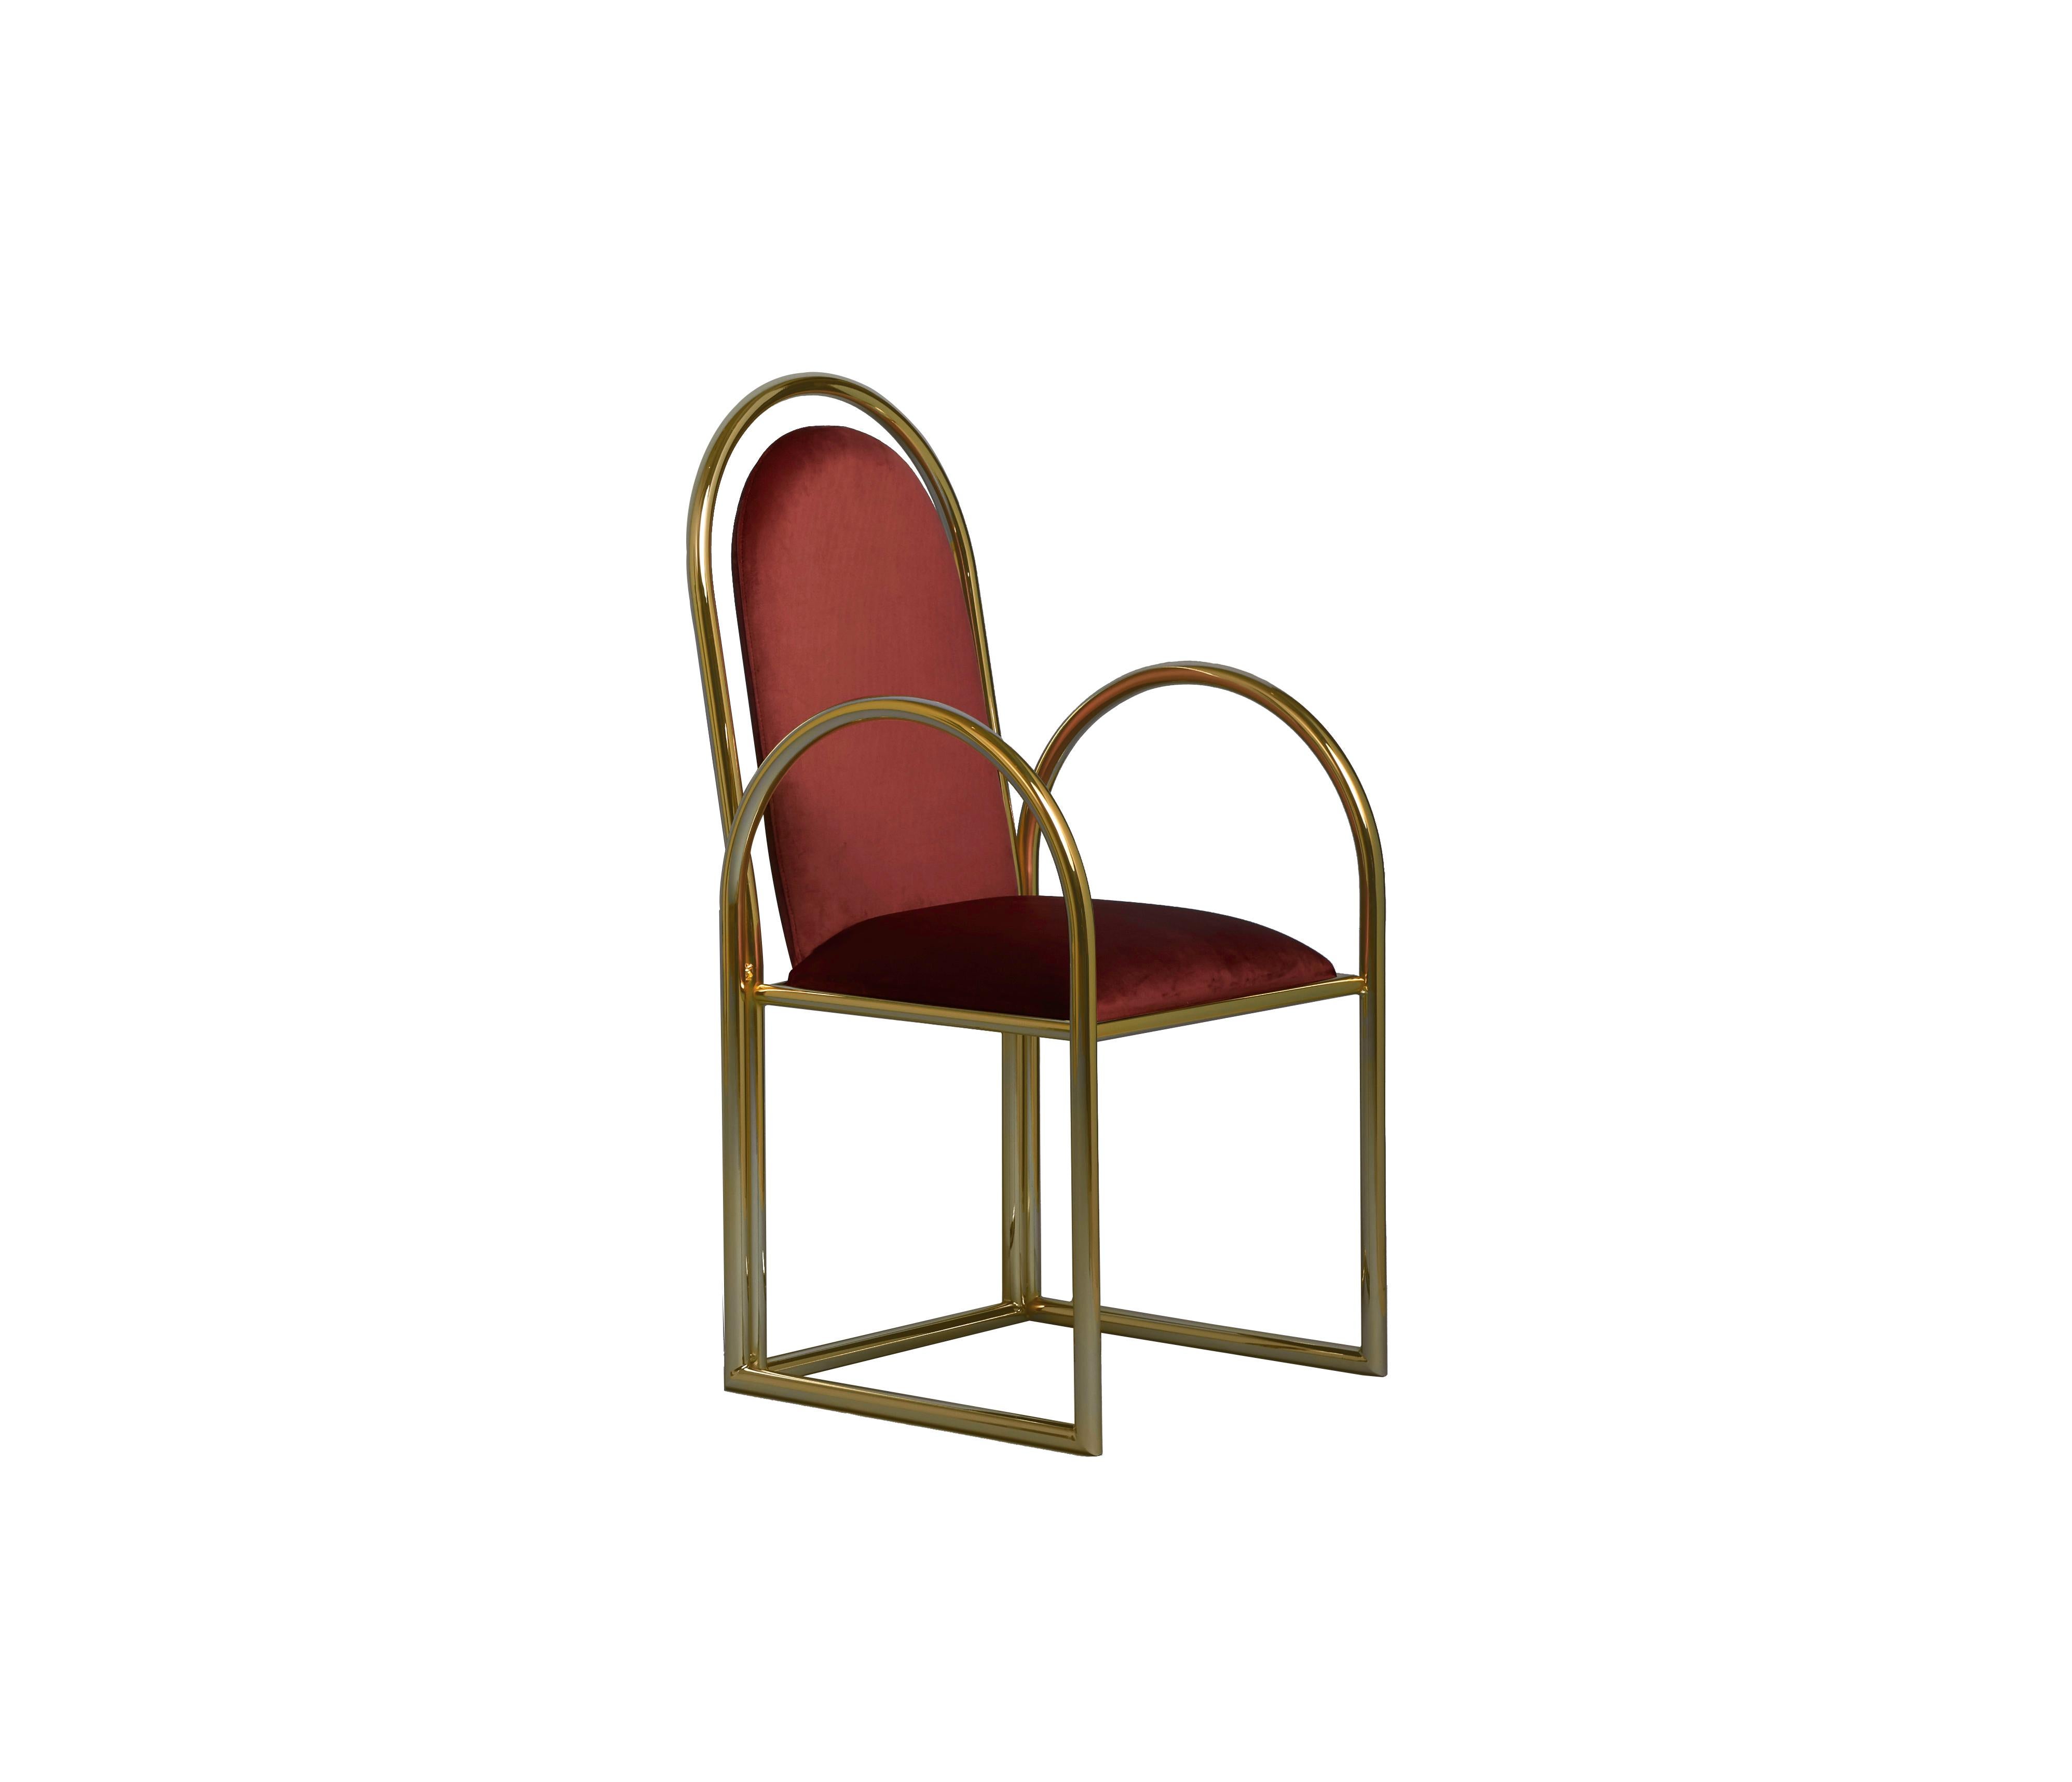 Contemporary Set of 2 Arco Chairs by Houtique